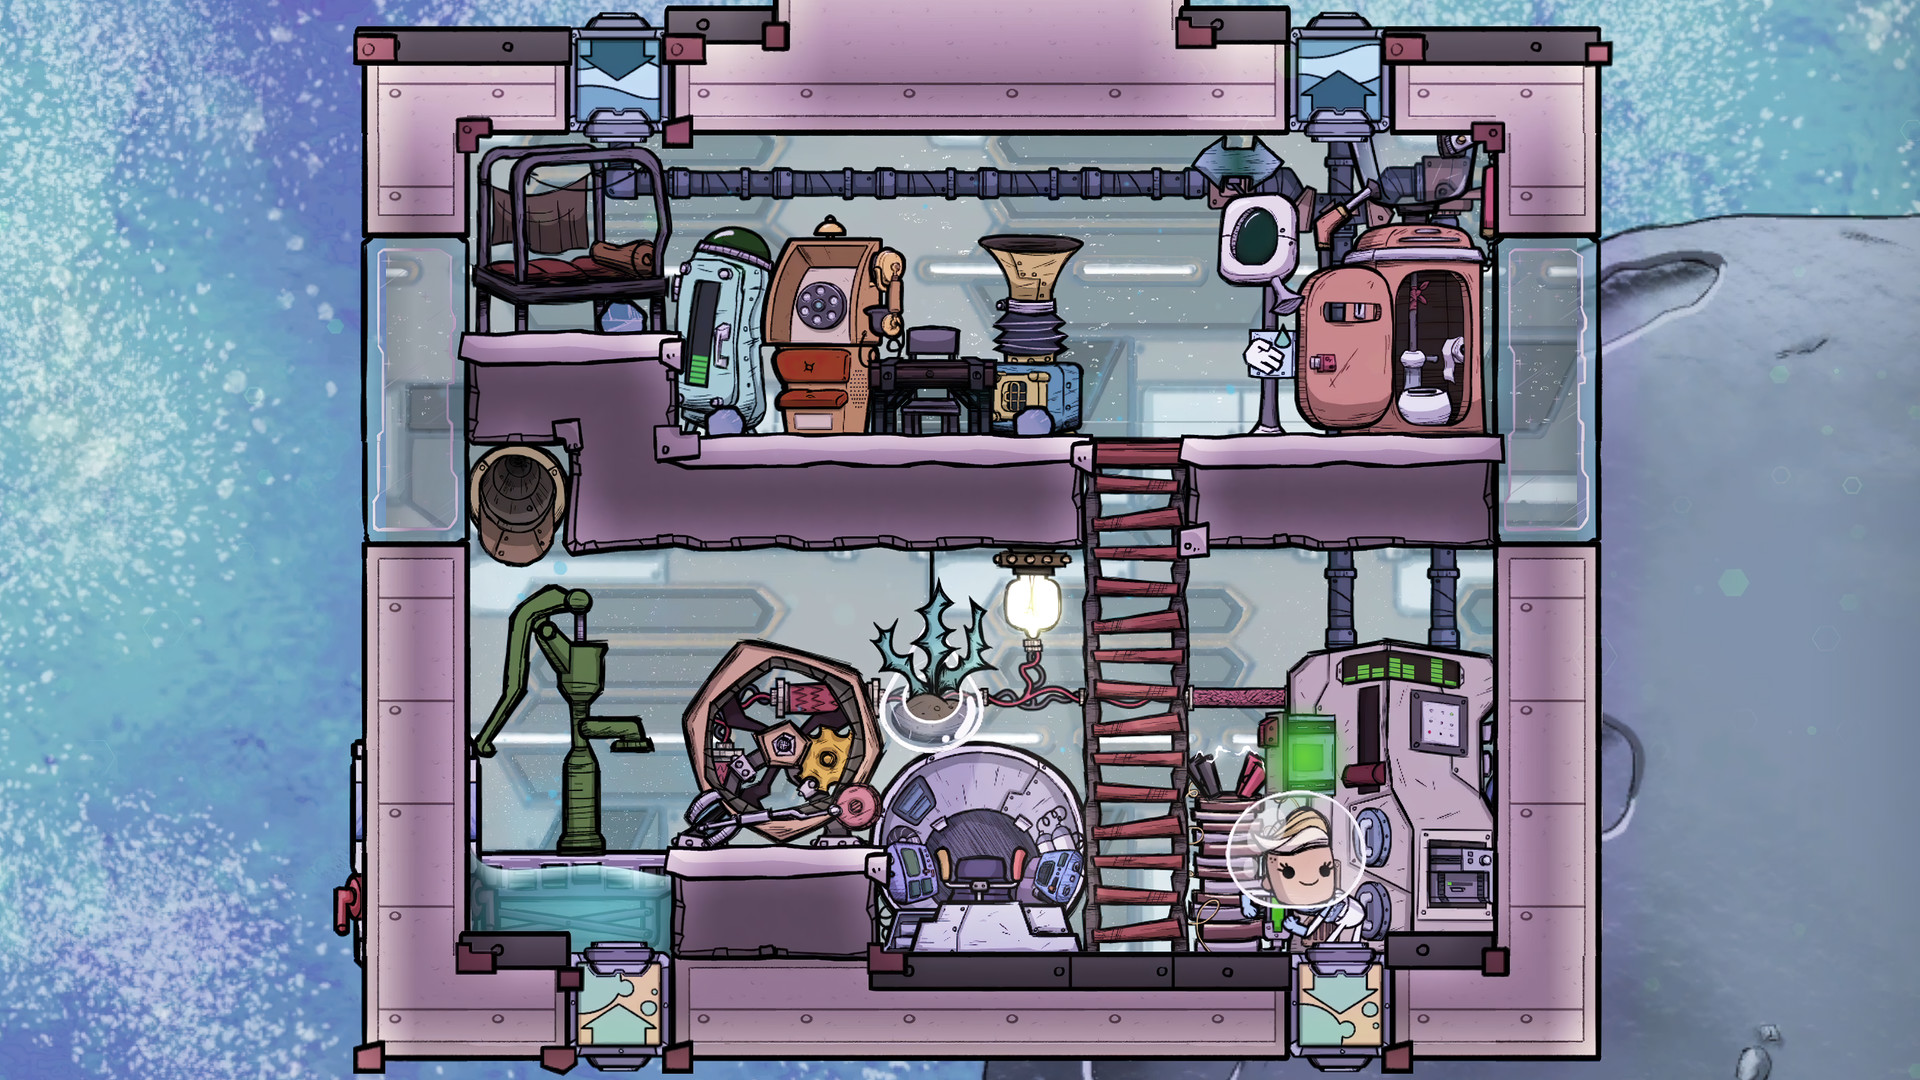 Save 25% on Oxygen Not Included - Spaced Out! on Steam